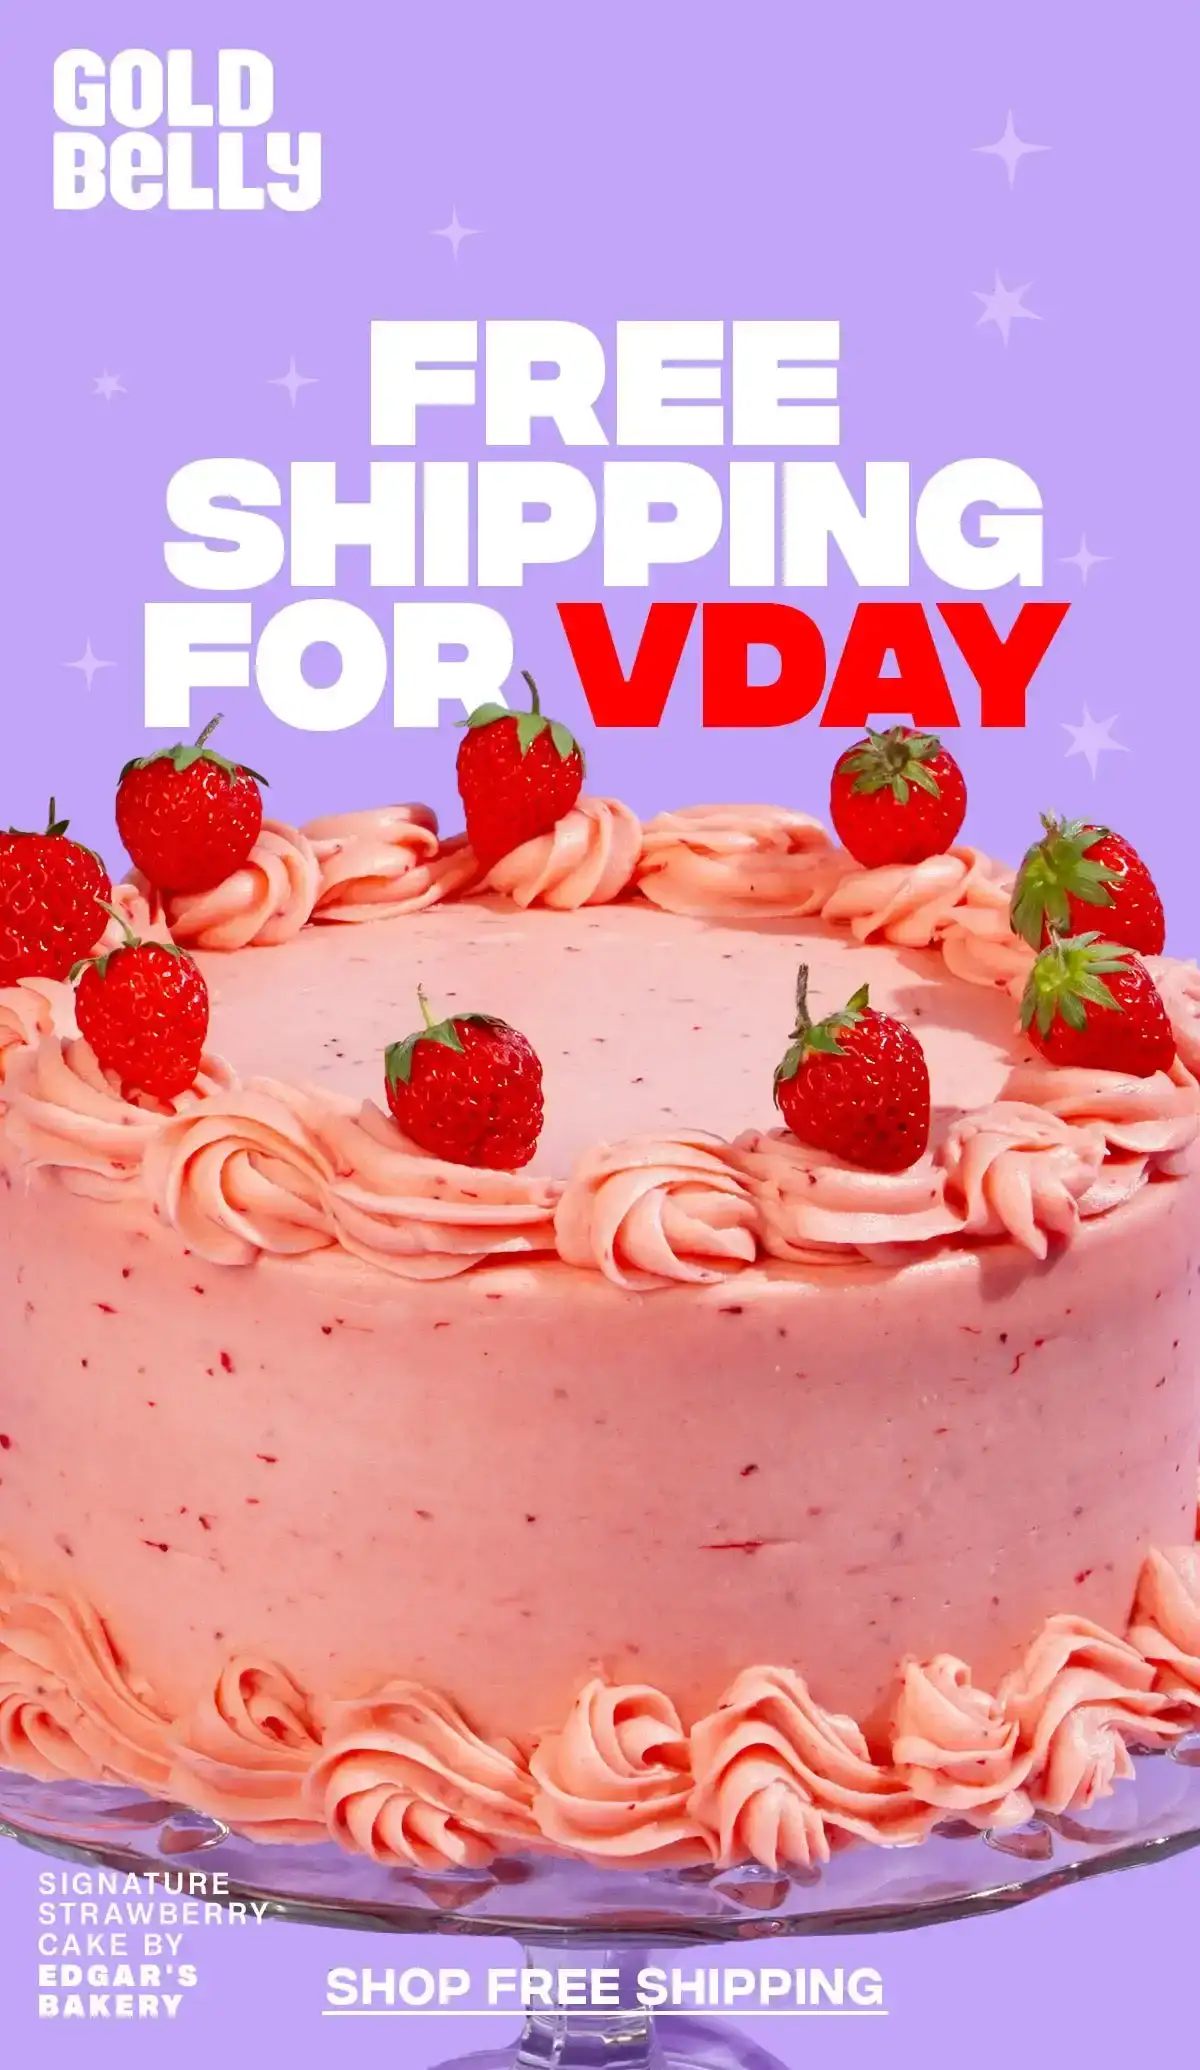 Free Shipping for Vday